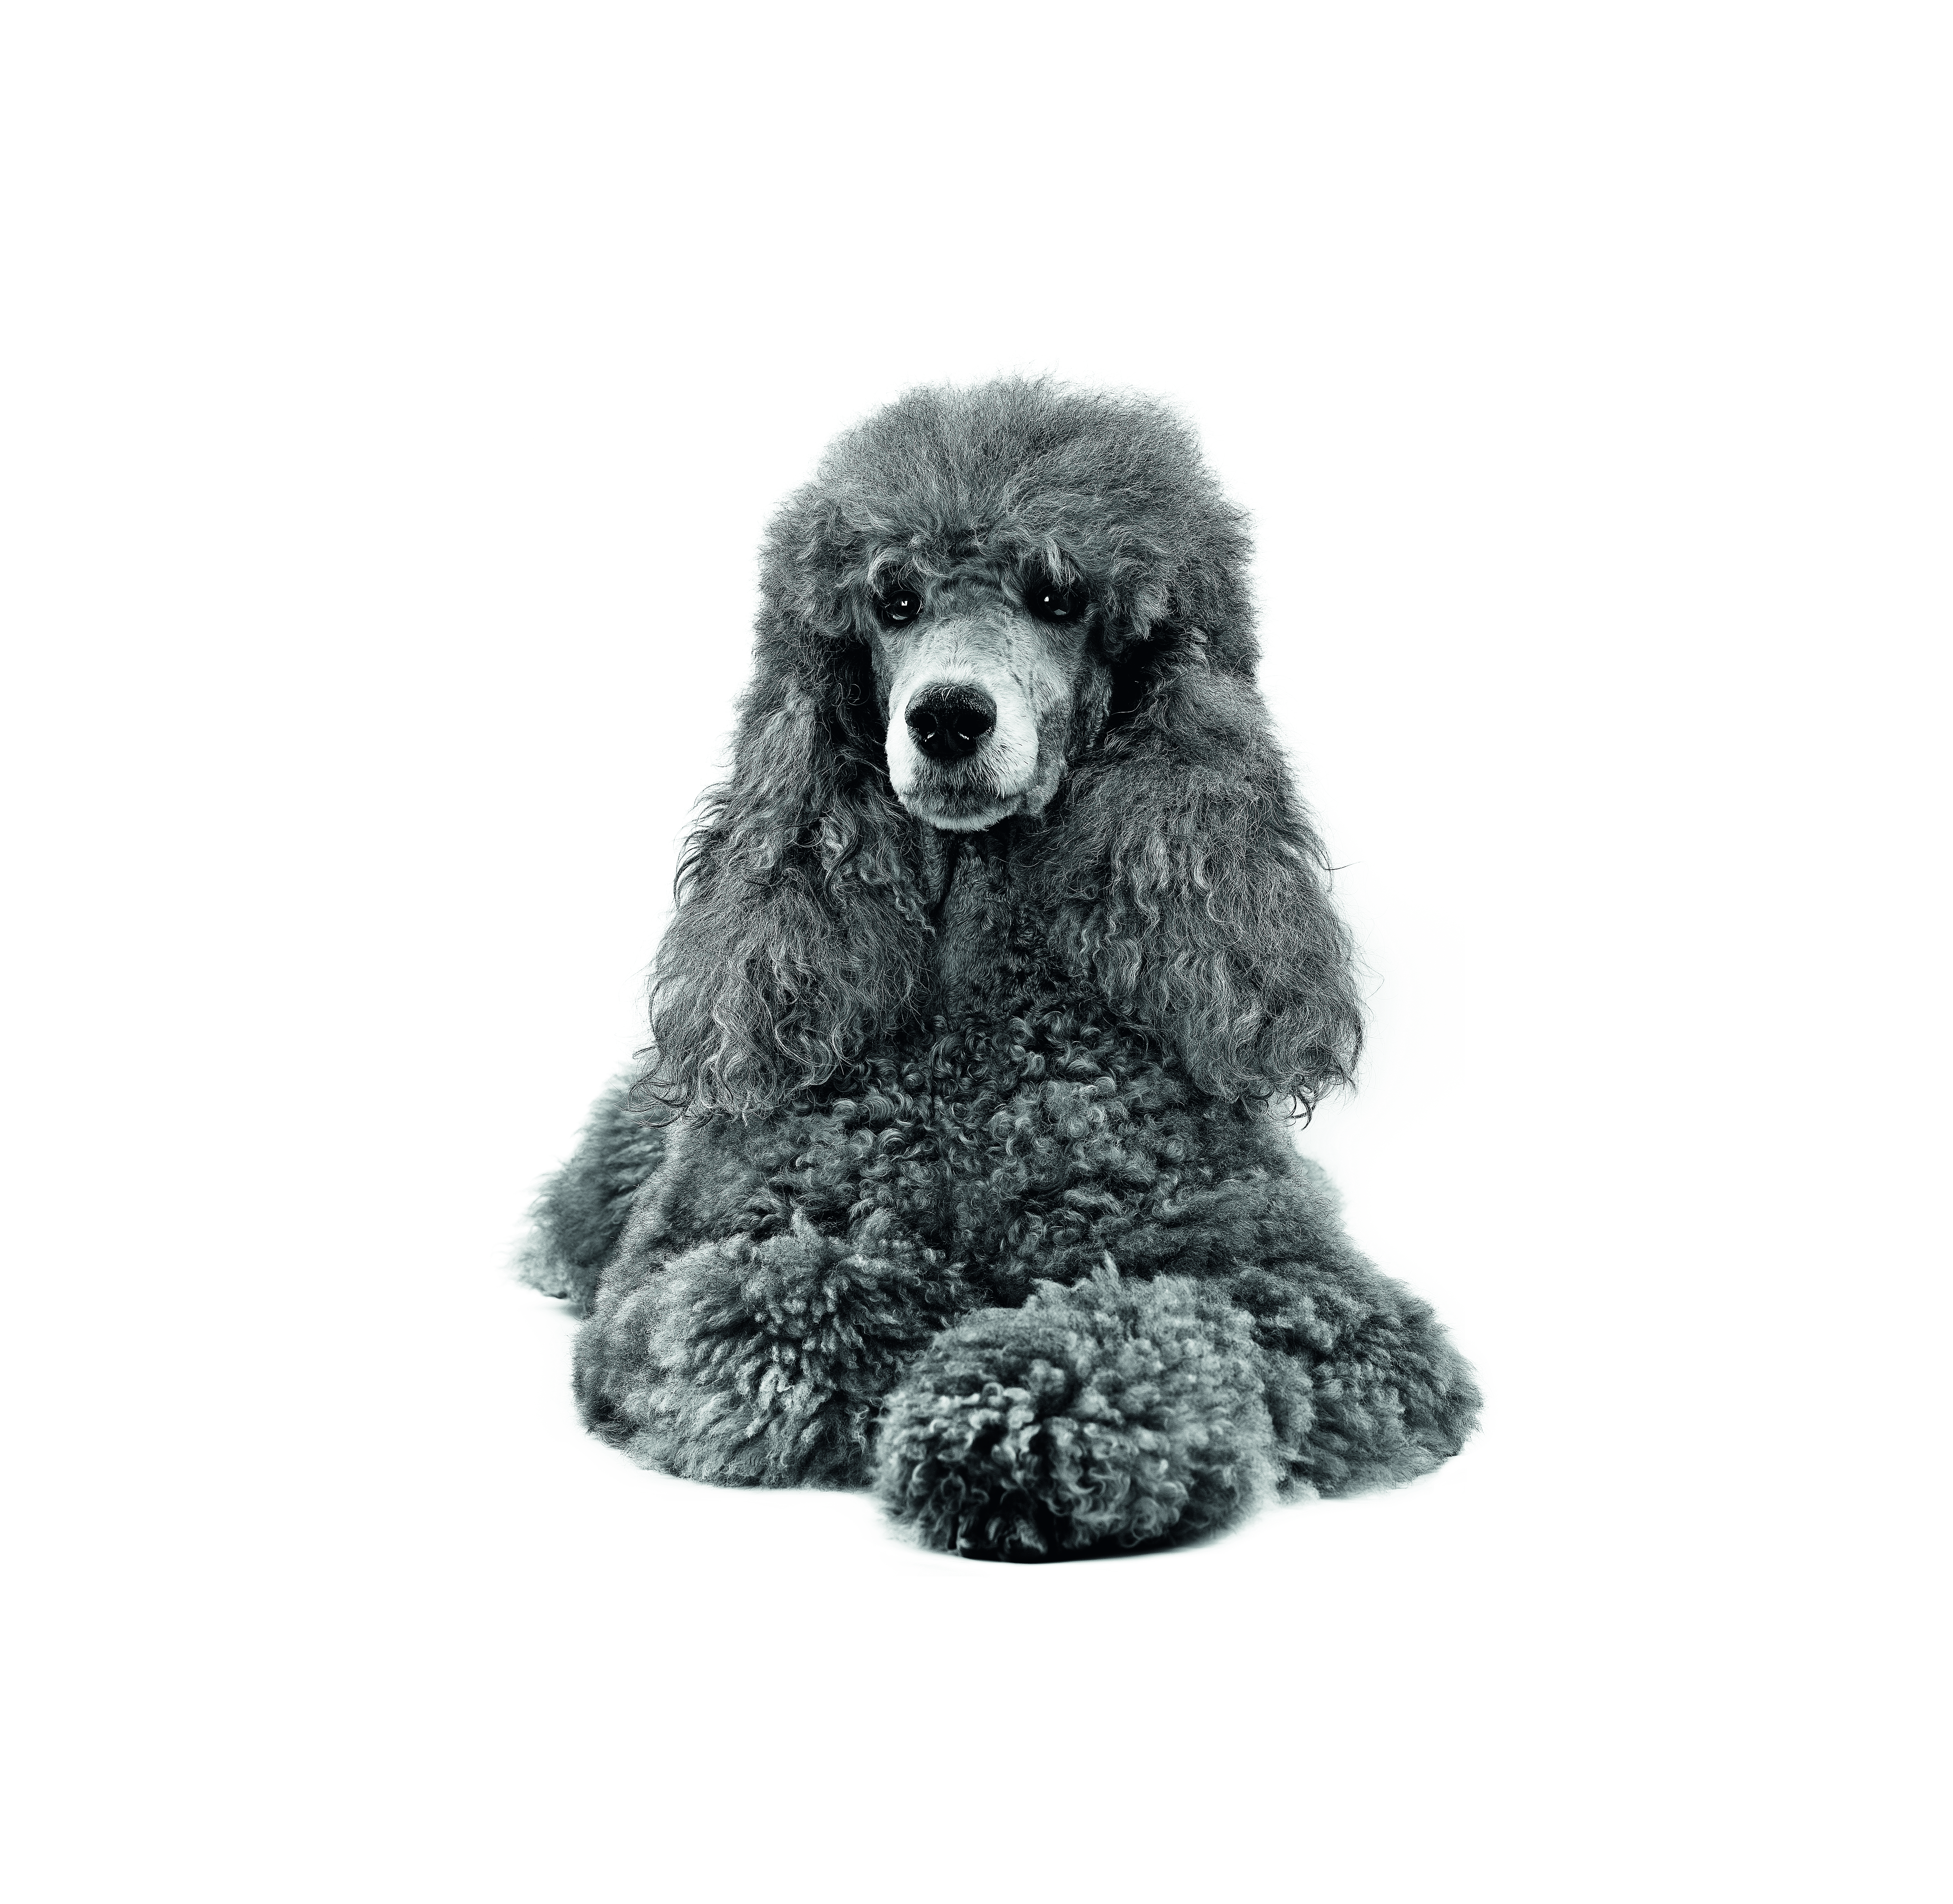 Poodle Adult sitting in black and white on a white backgorund